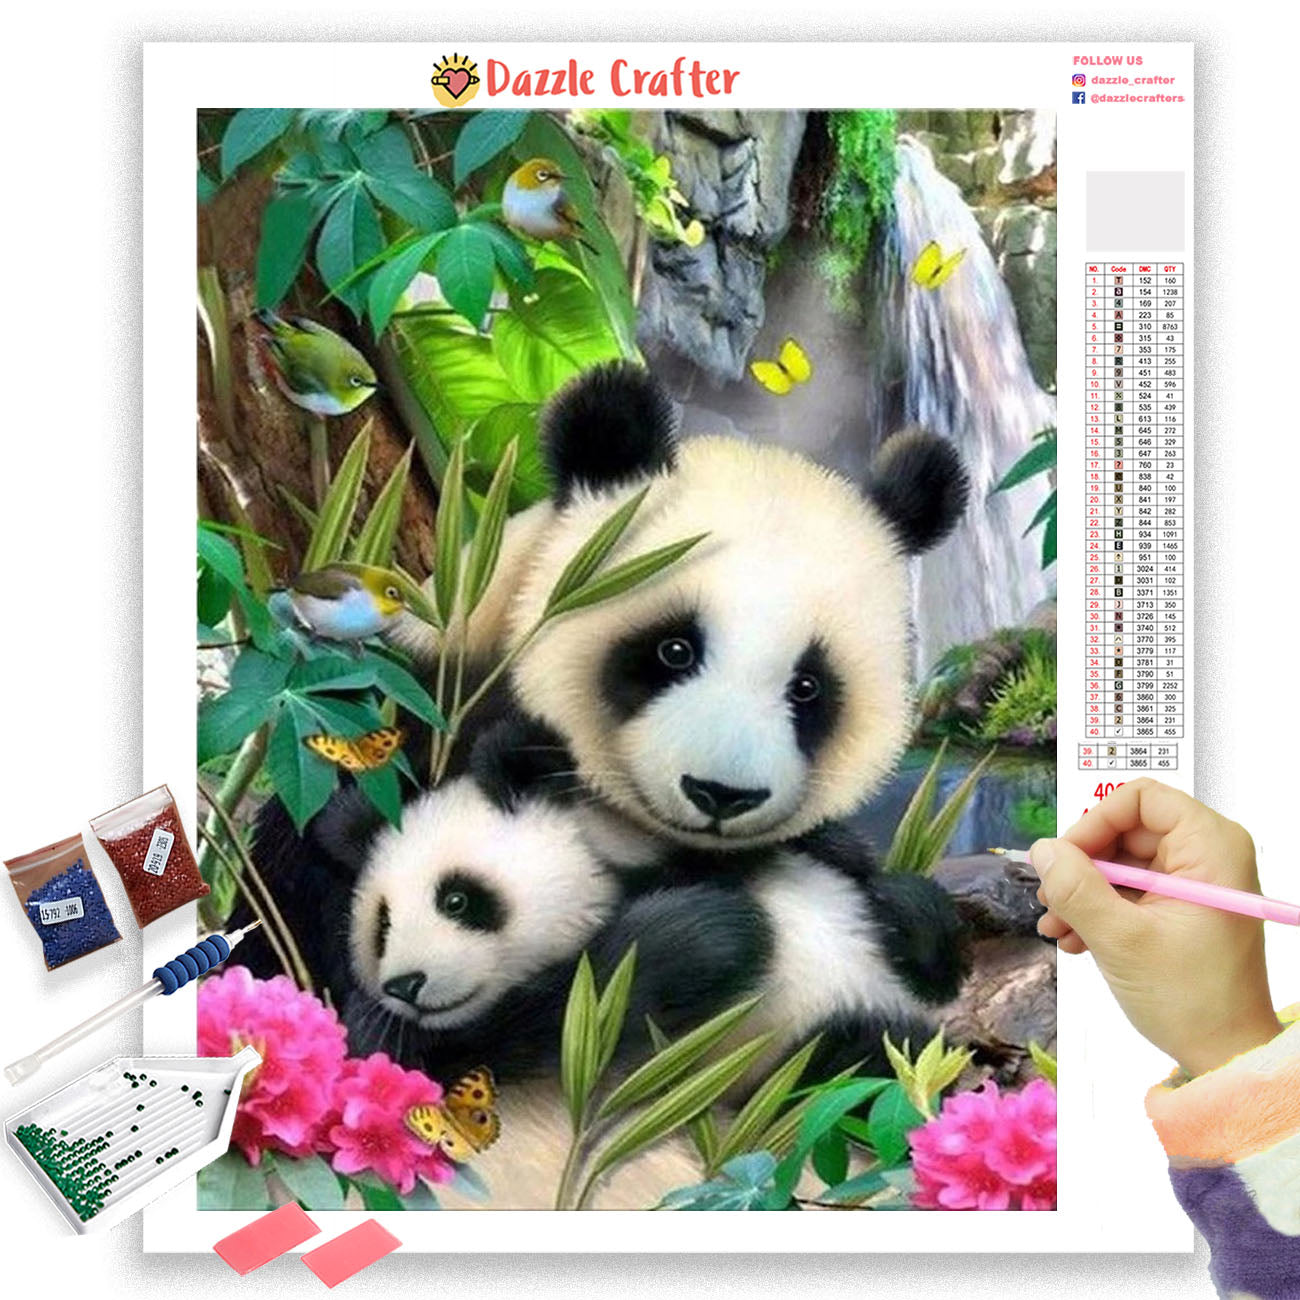 MOTHER AND BABY PANDA  Painting Kit